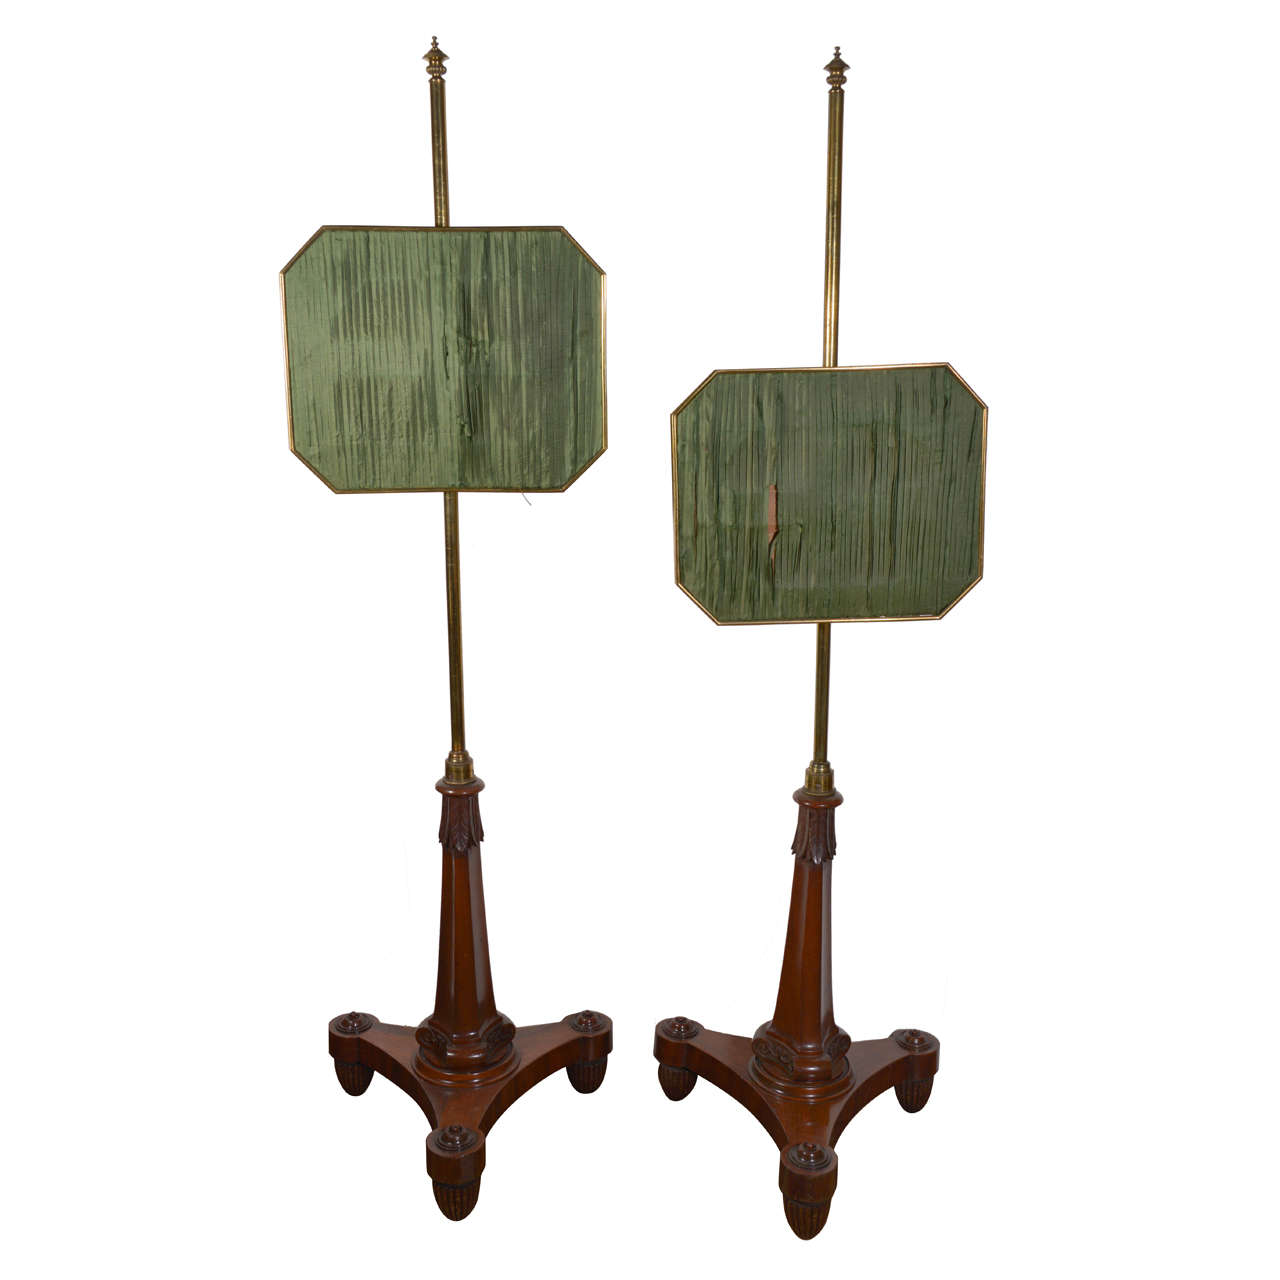 Pair of Regency Gilt-Brass Mounted Pole Screens For Sale